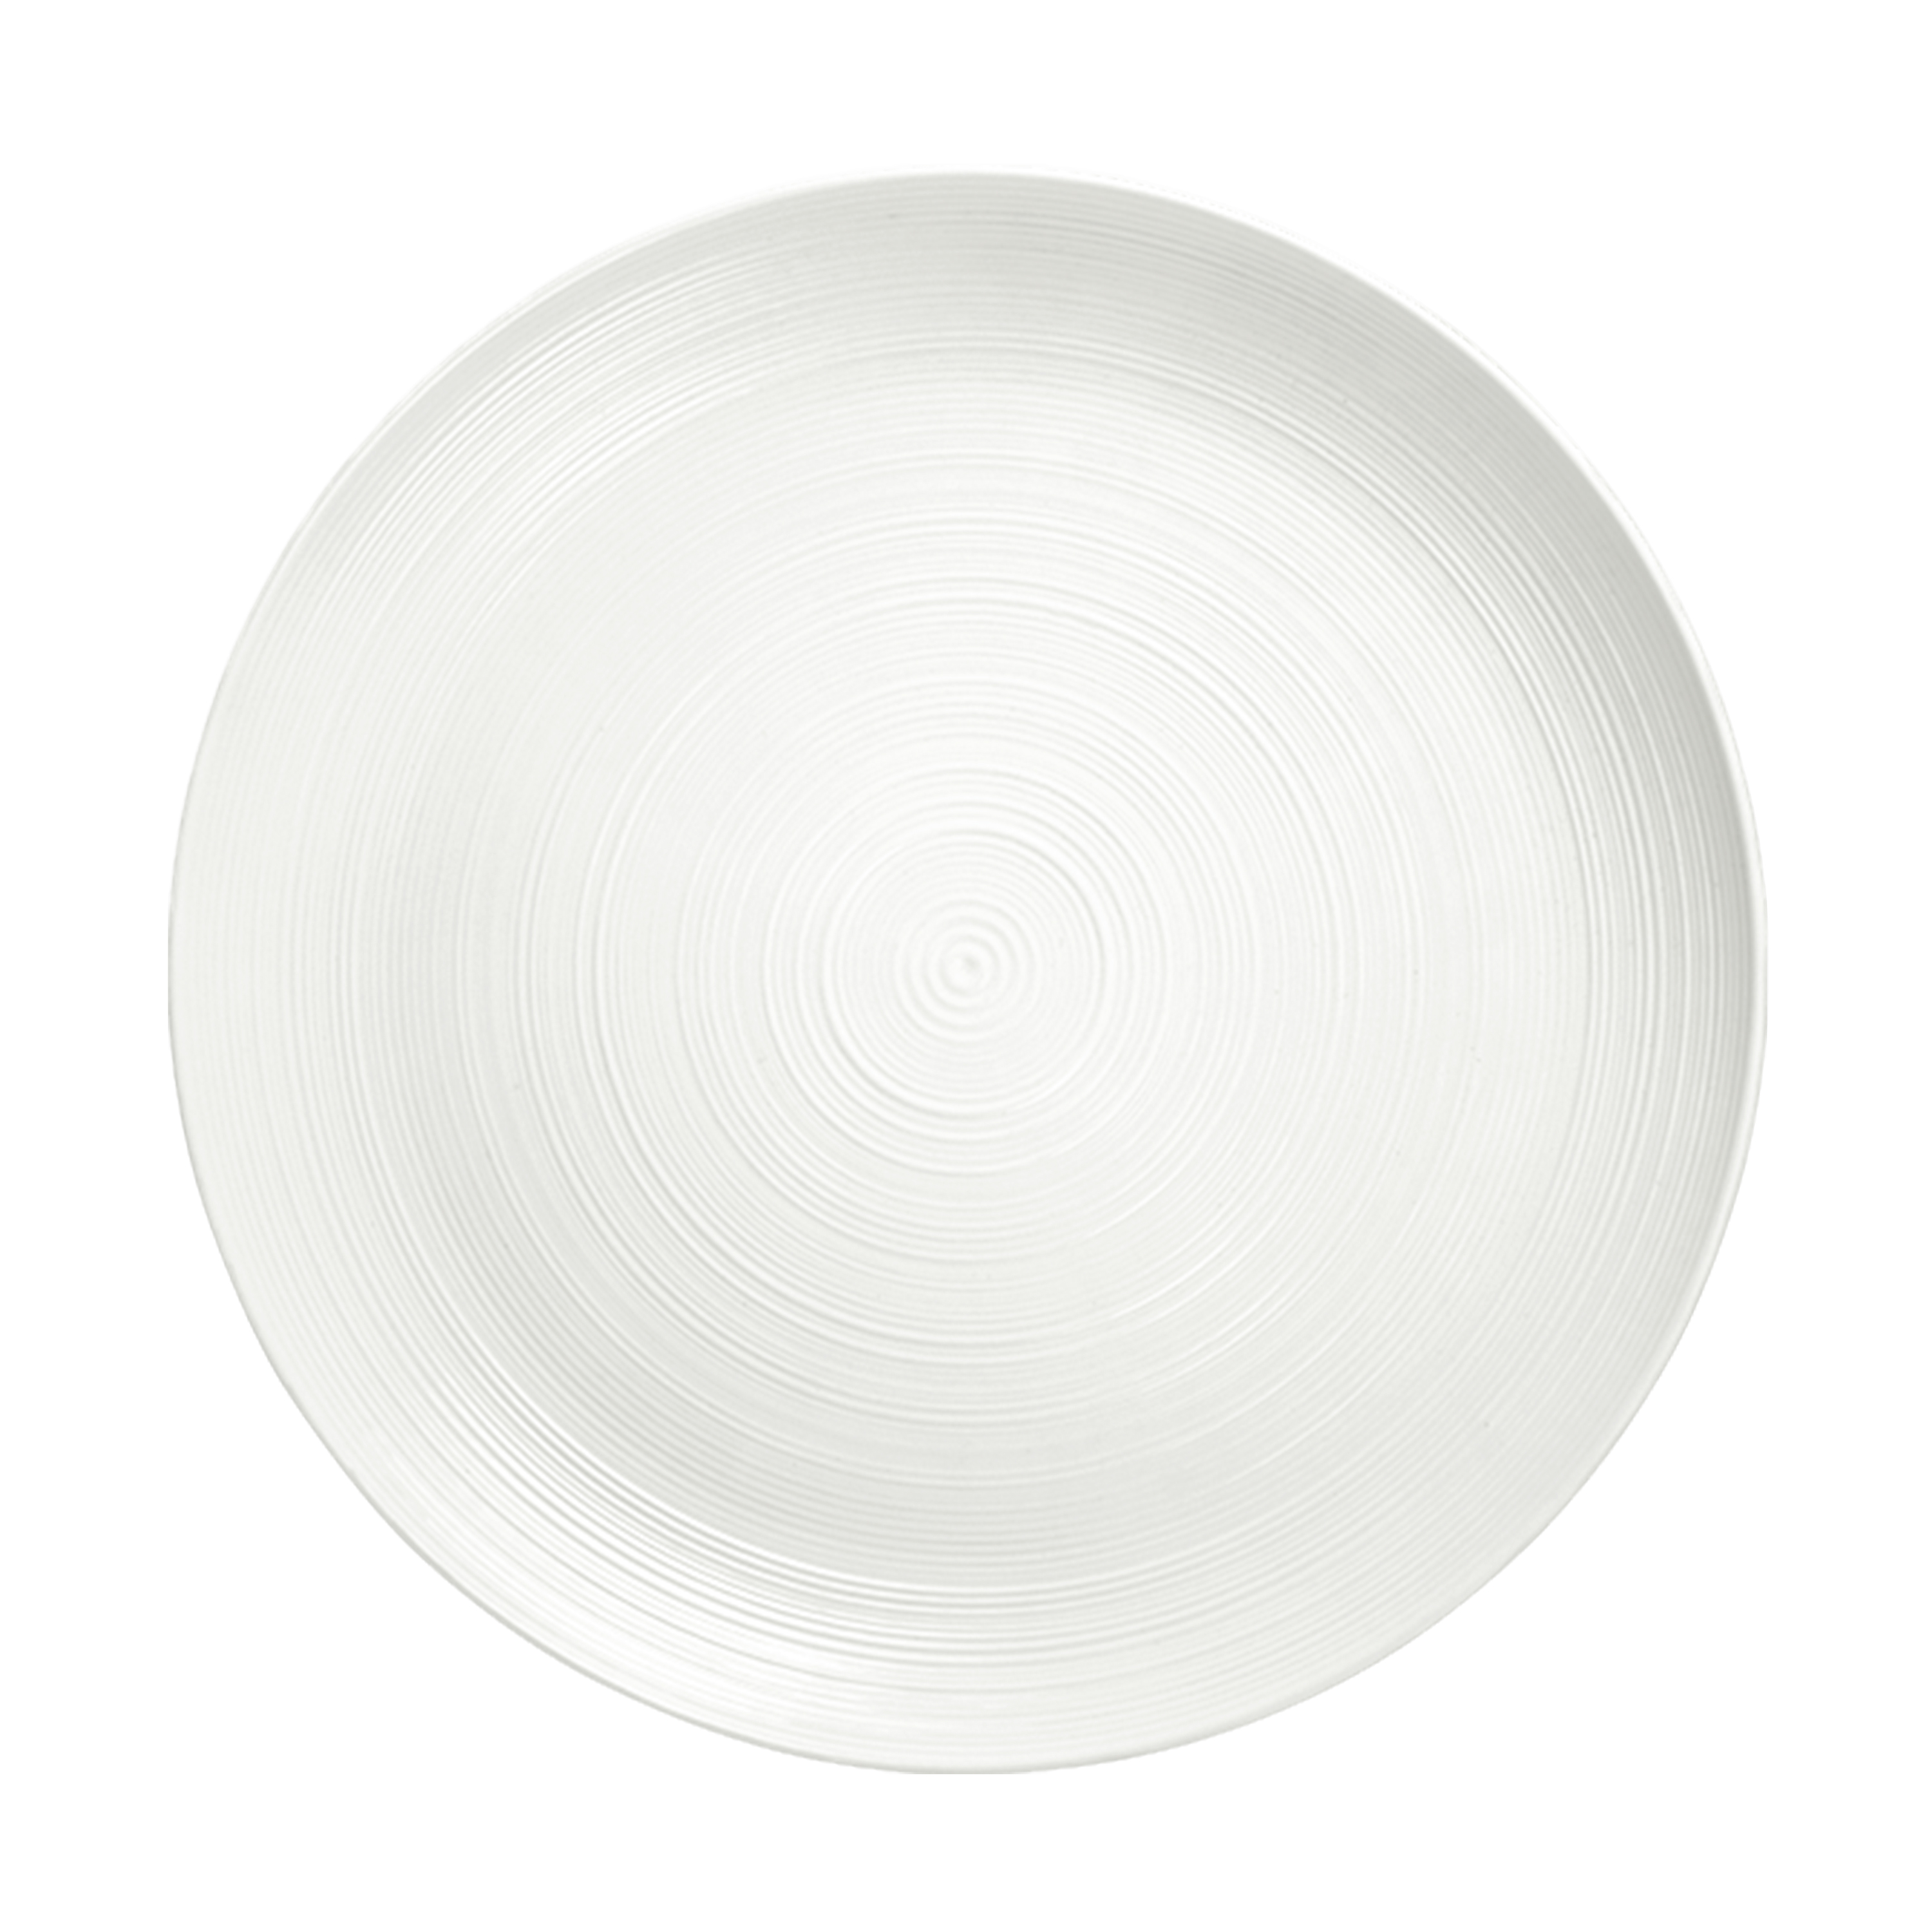 American Conventional Plate & Bowl Sets, White, 12-piece set slideshow image 3